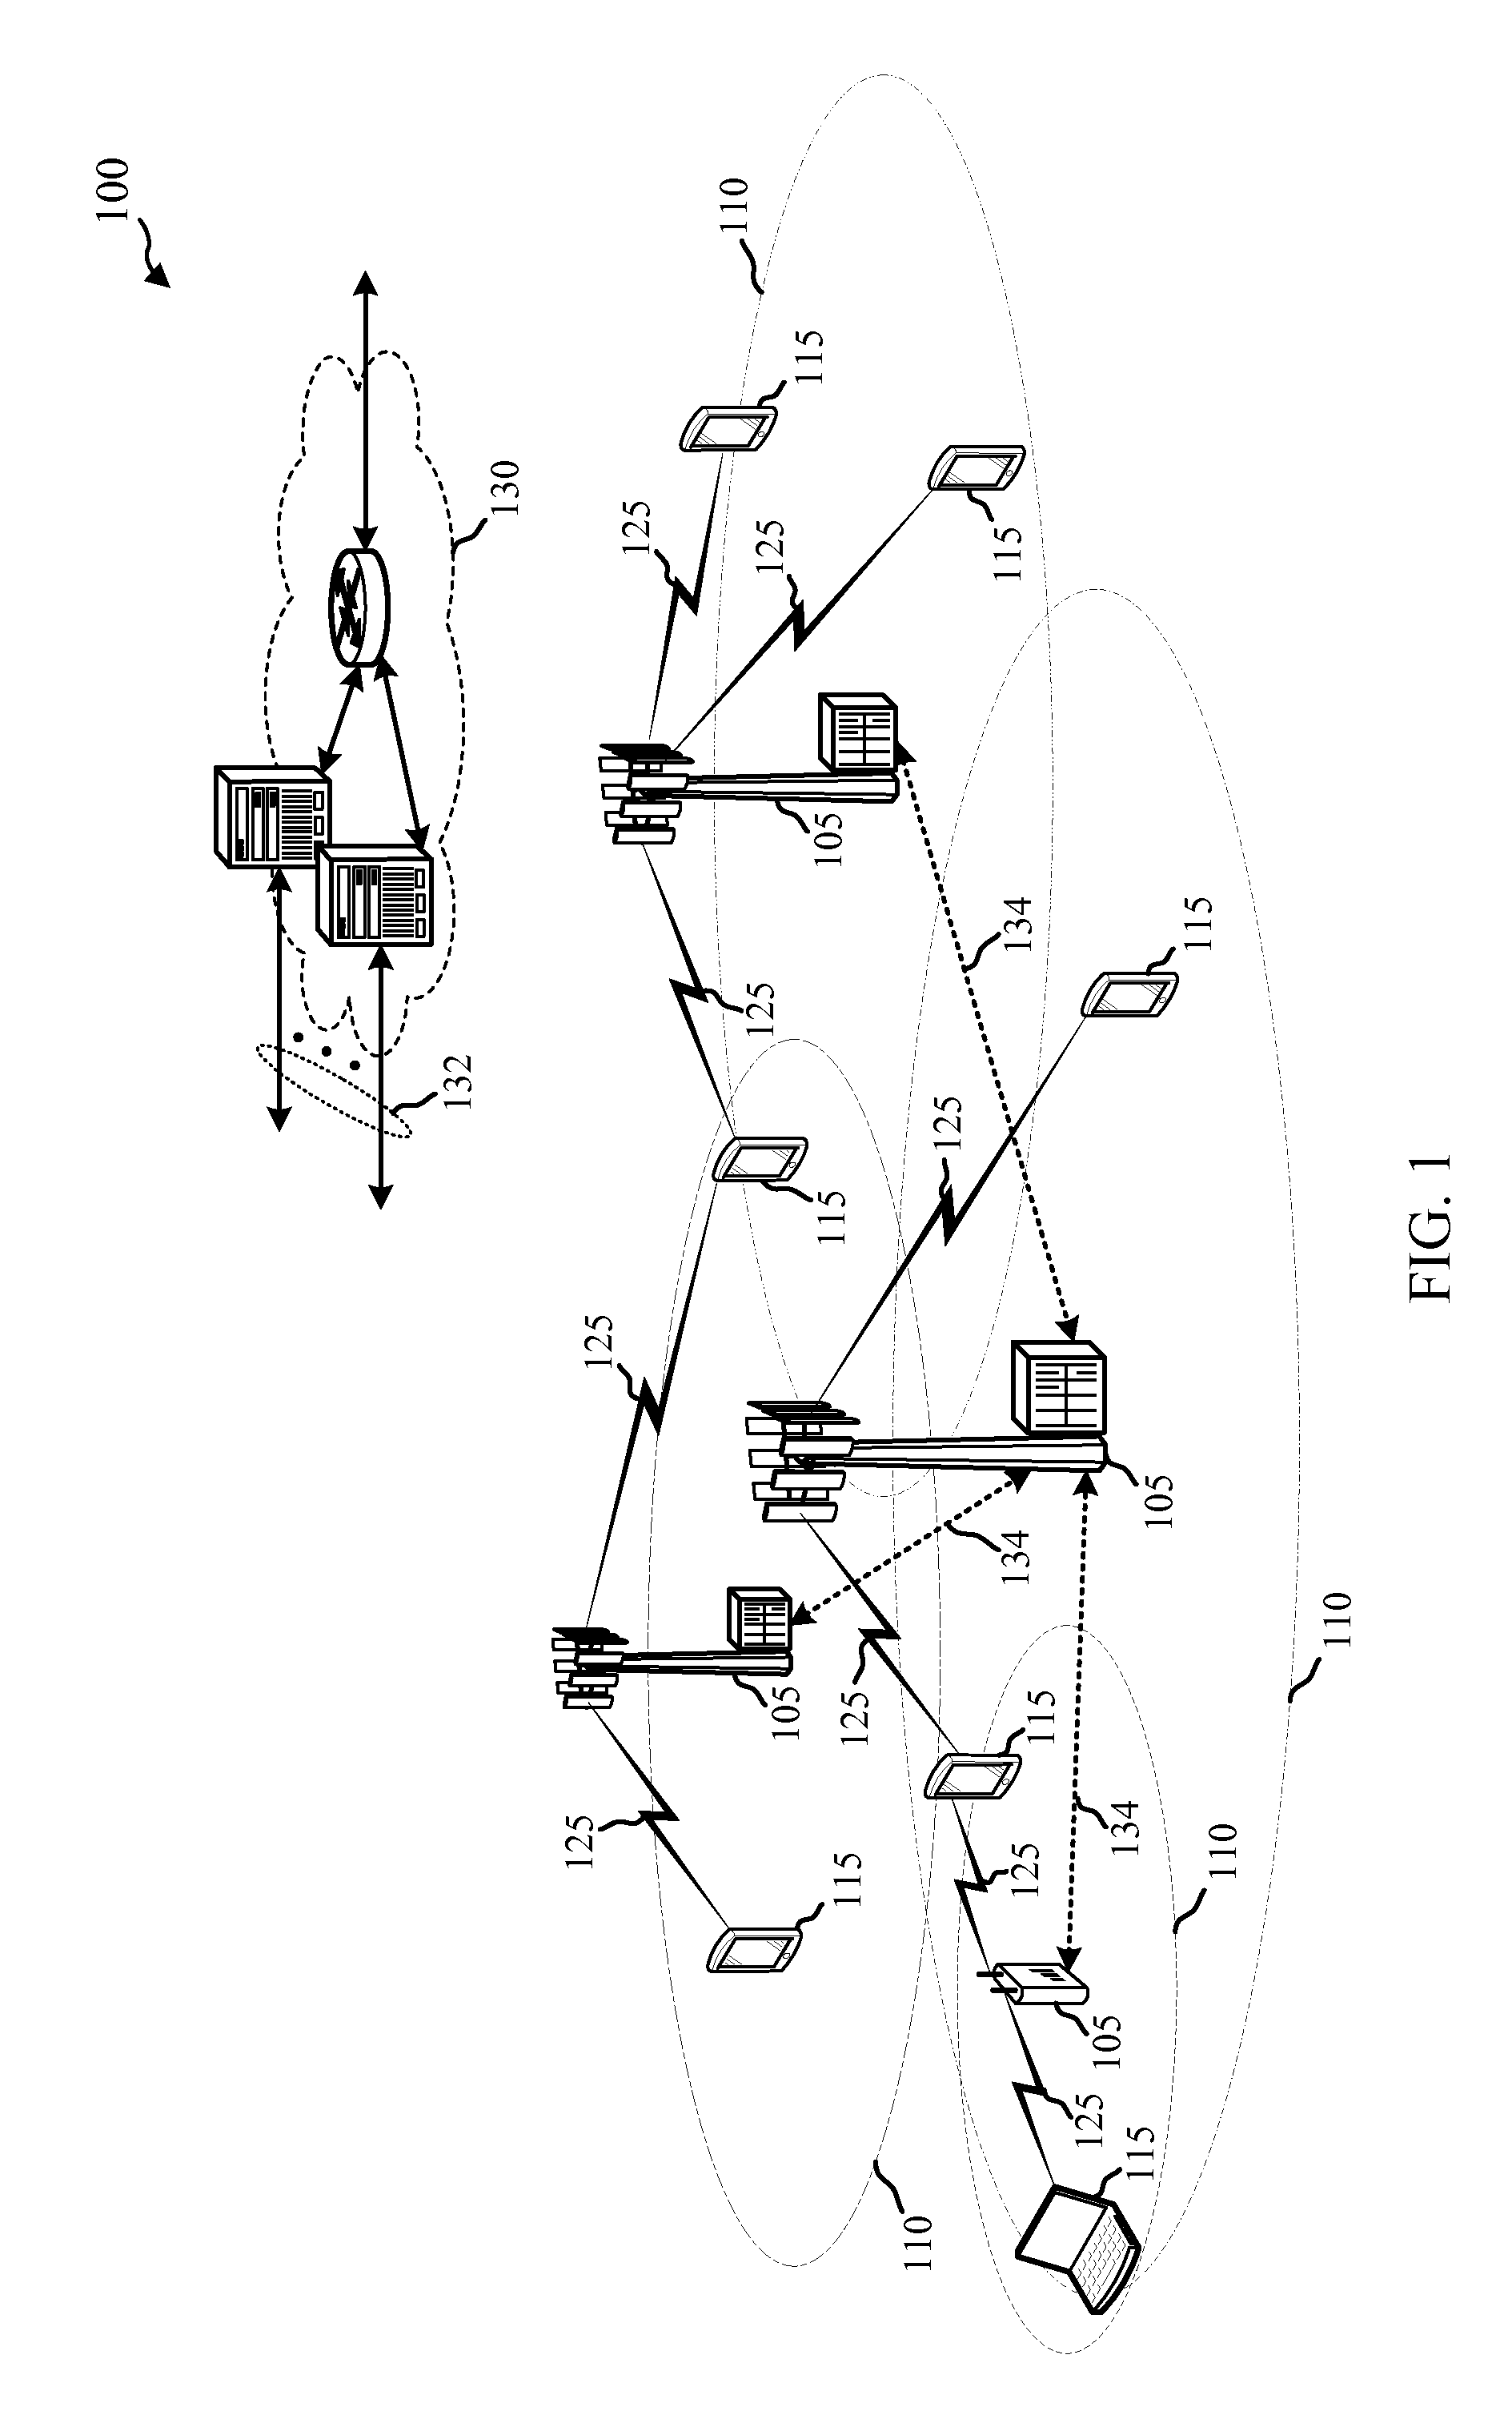 Enhanced connection management for multiple access networks